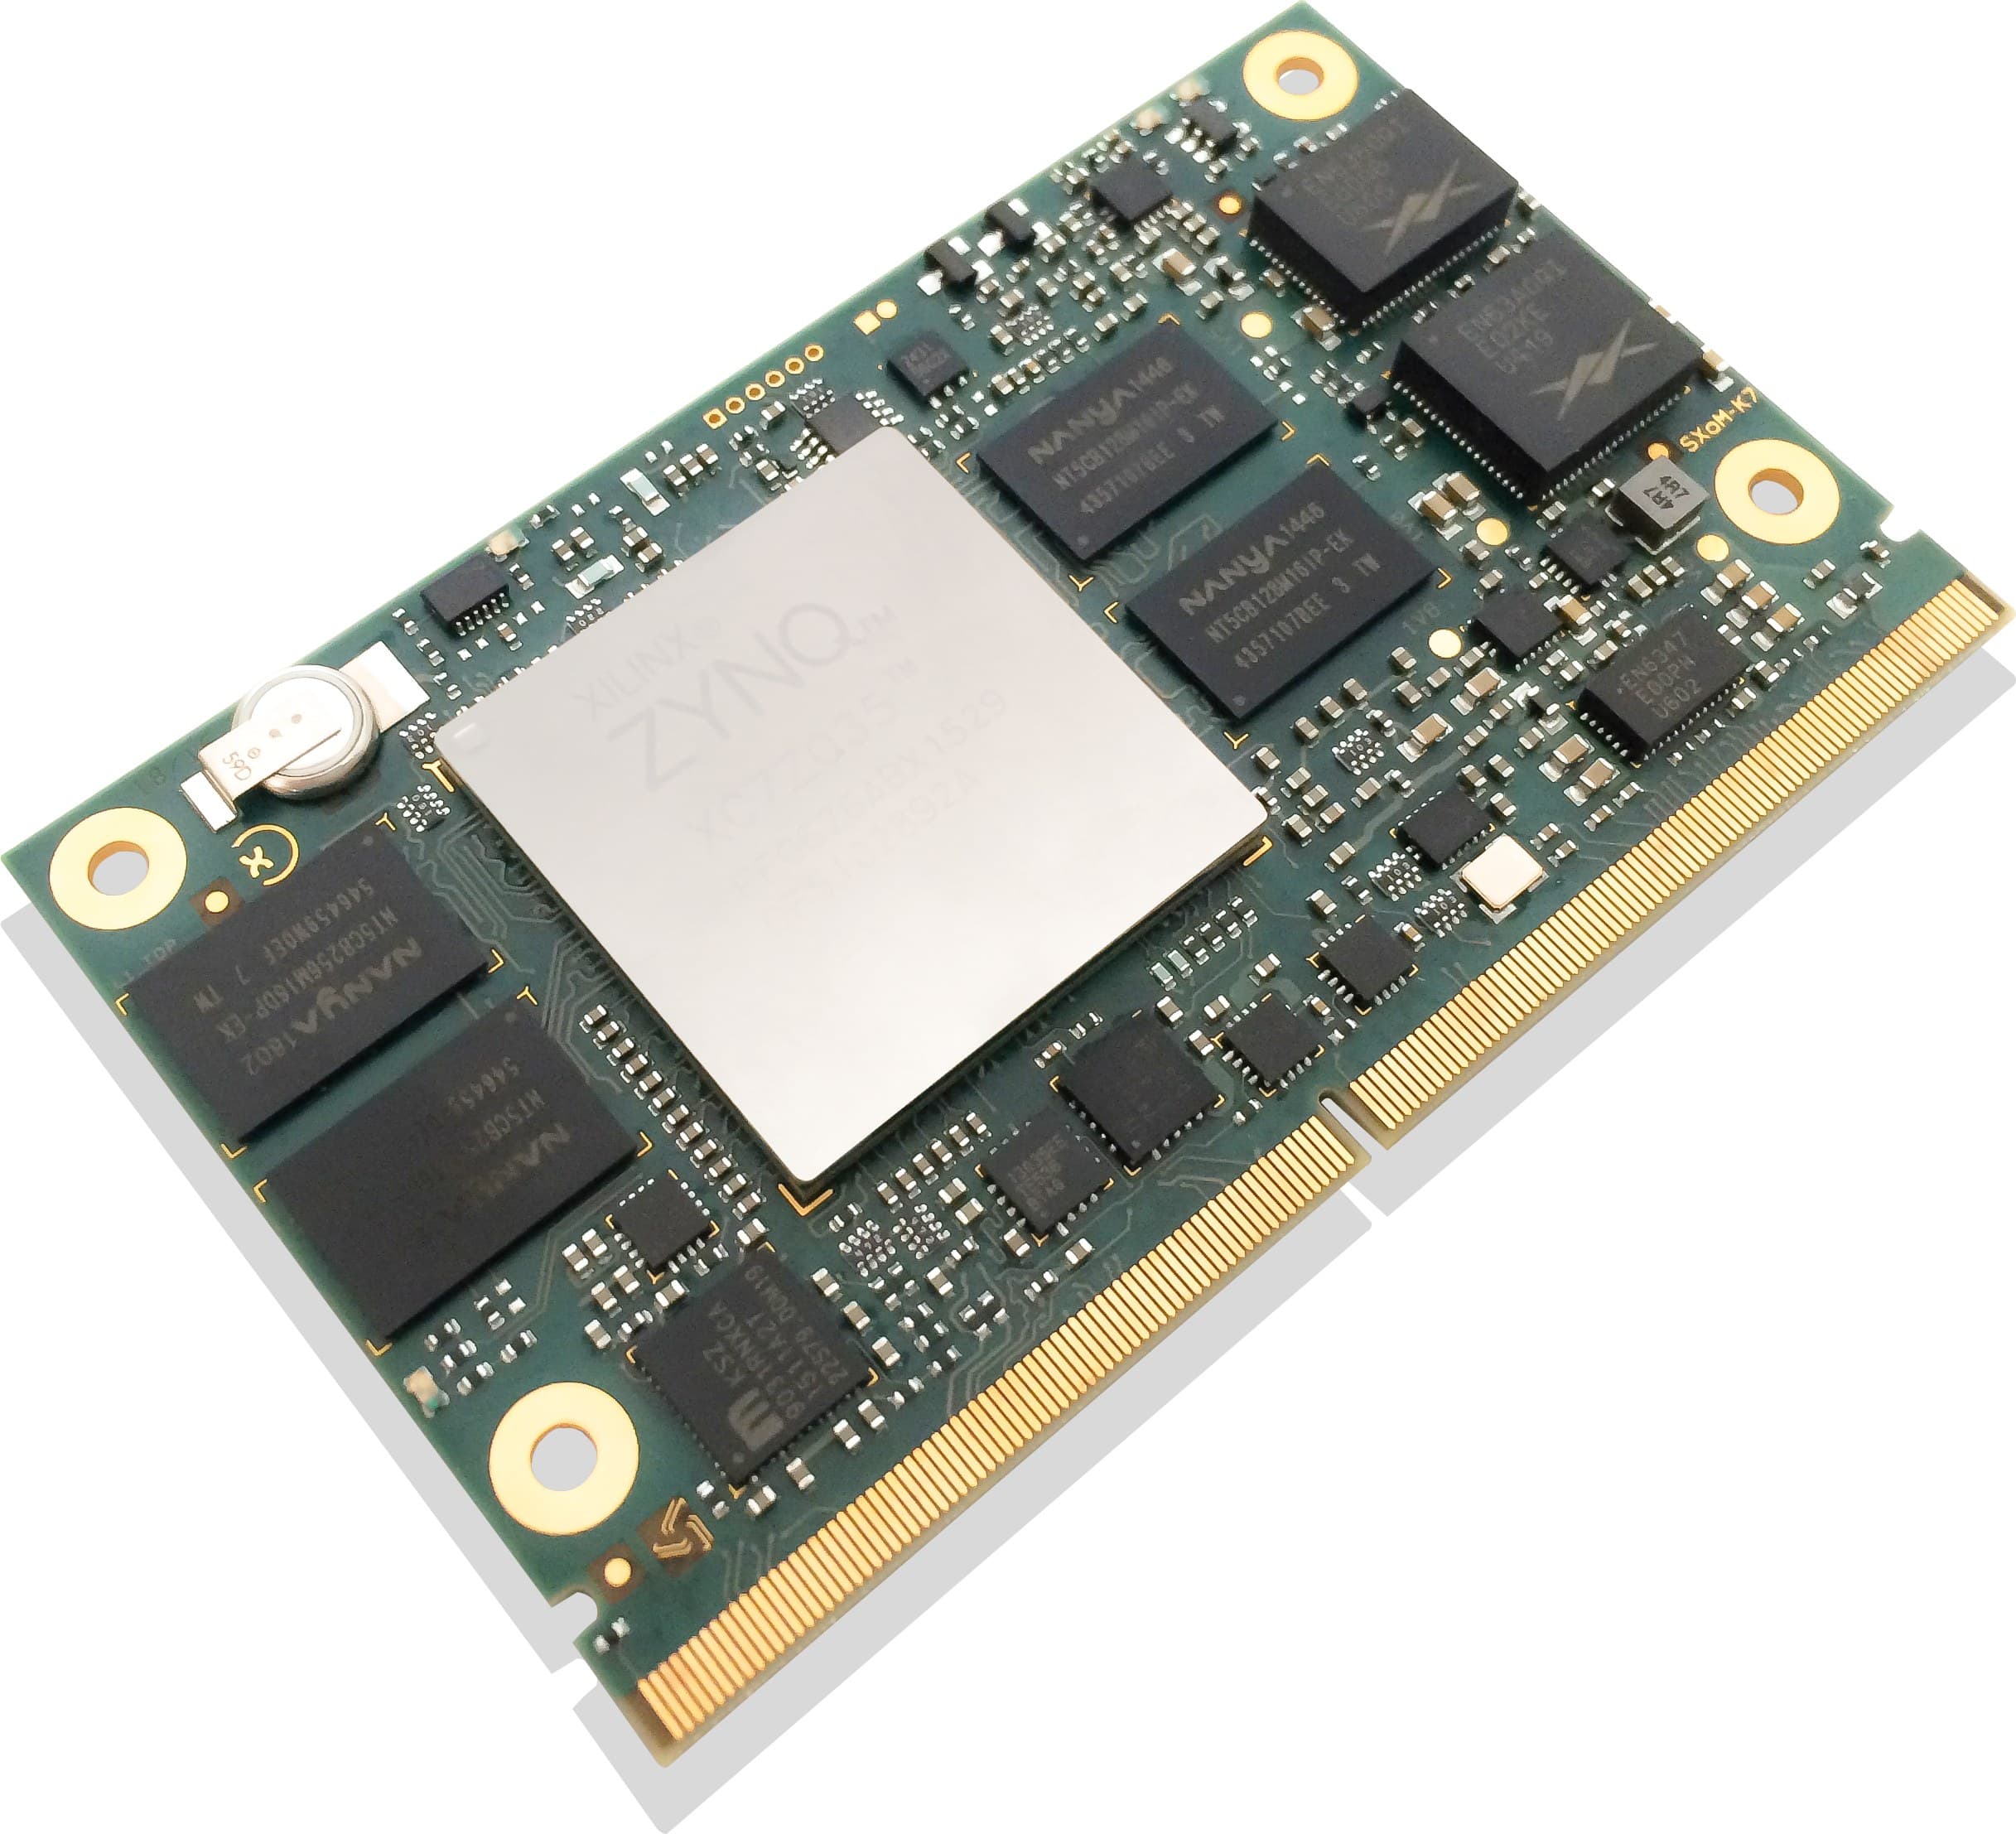 SXoM MS2-K7 - System-on-Module compliant with SMARC 2.0